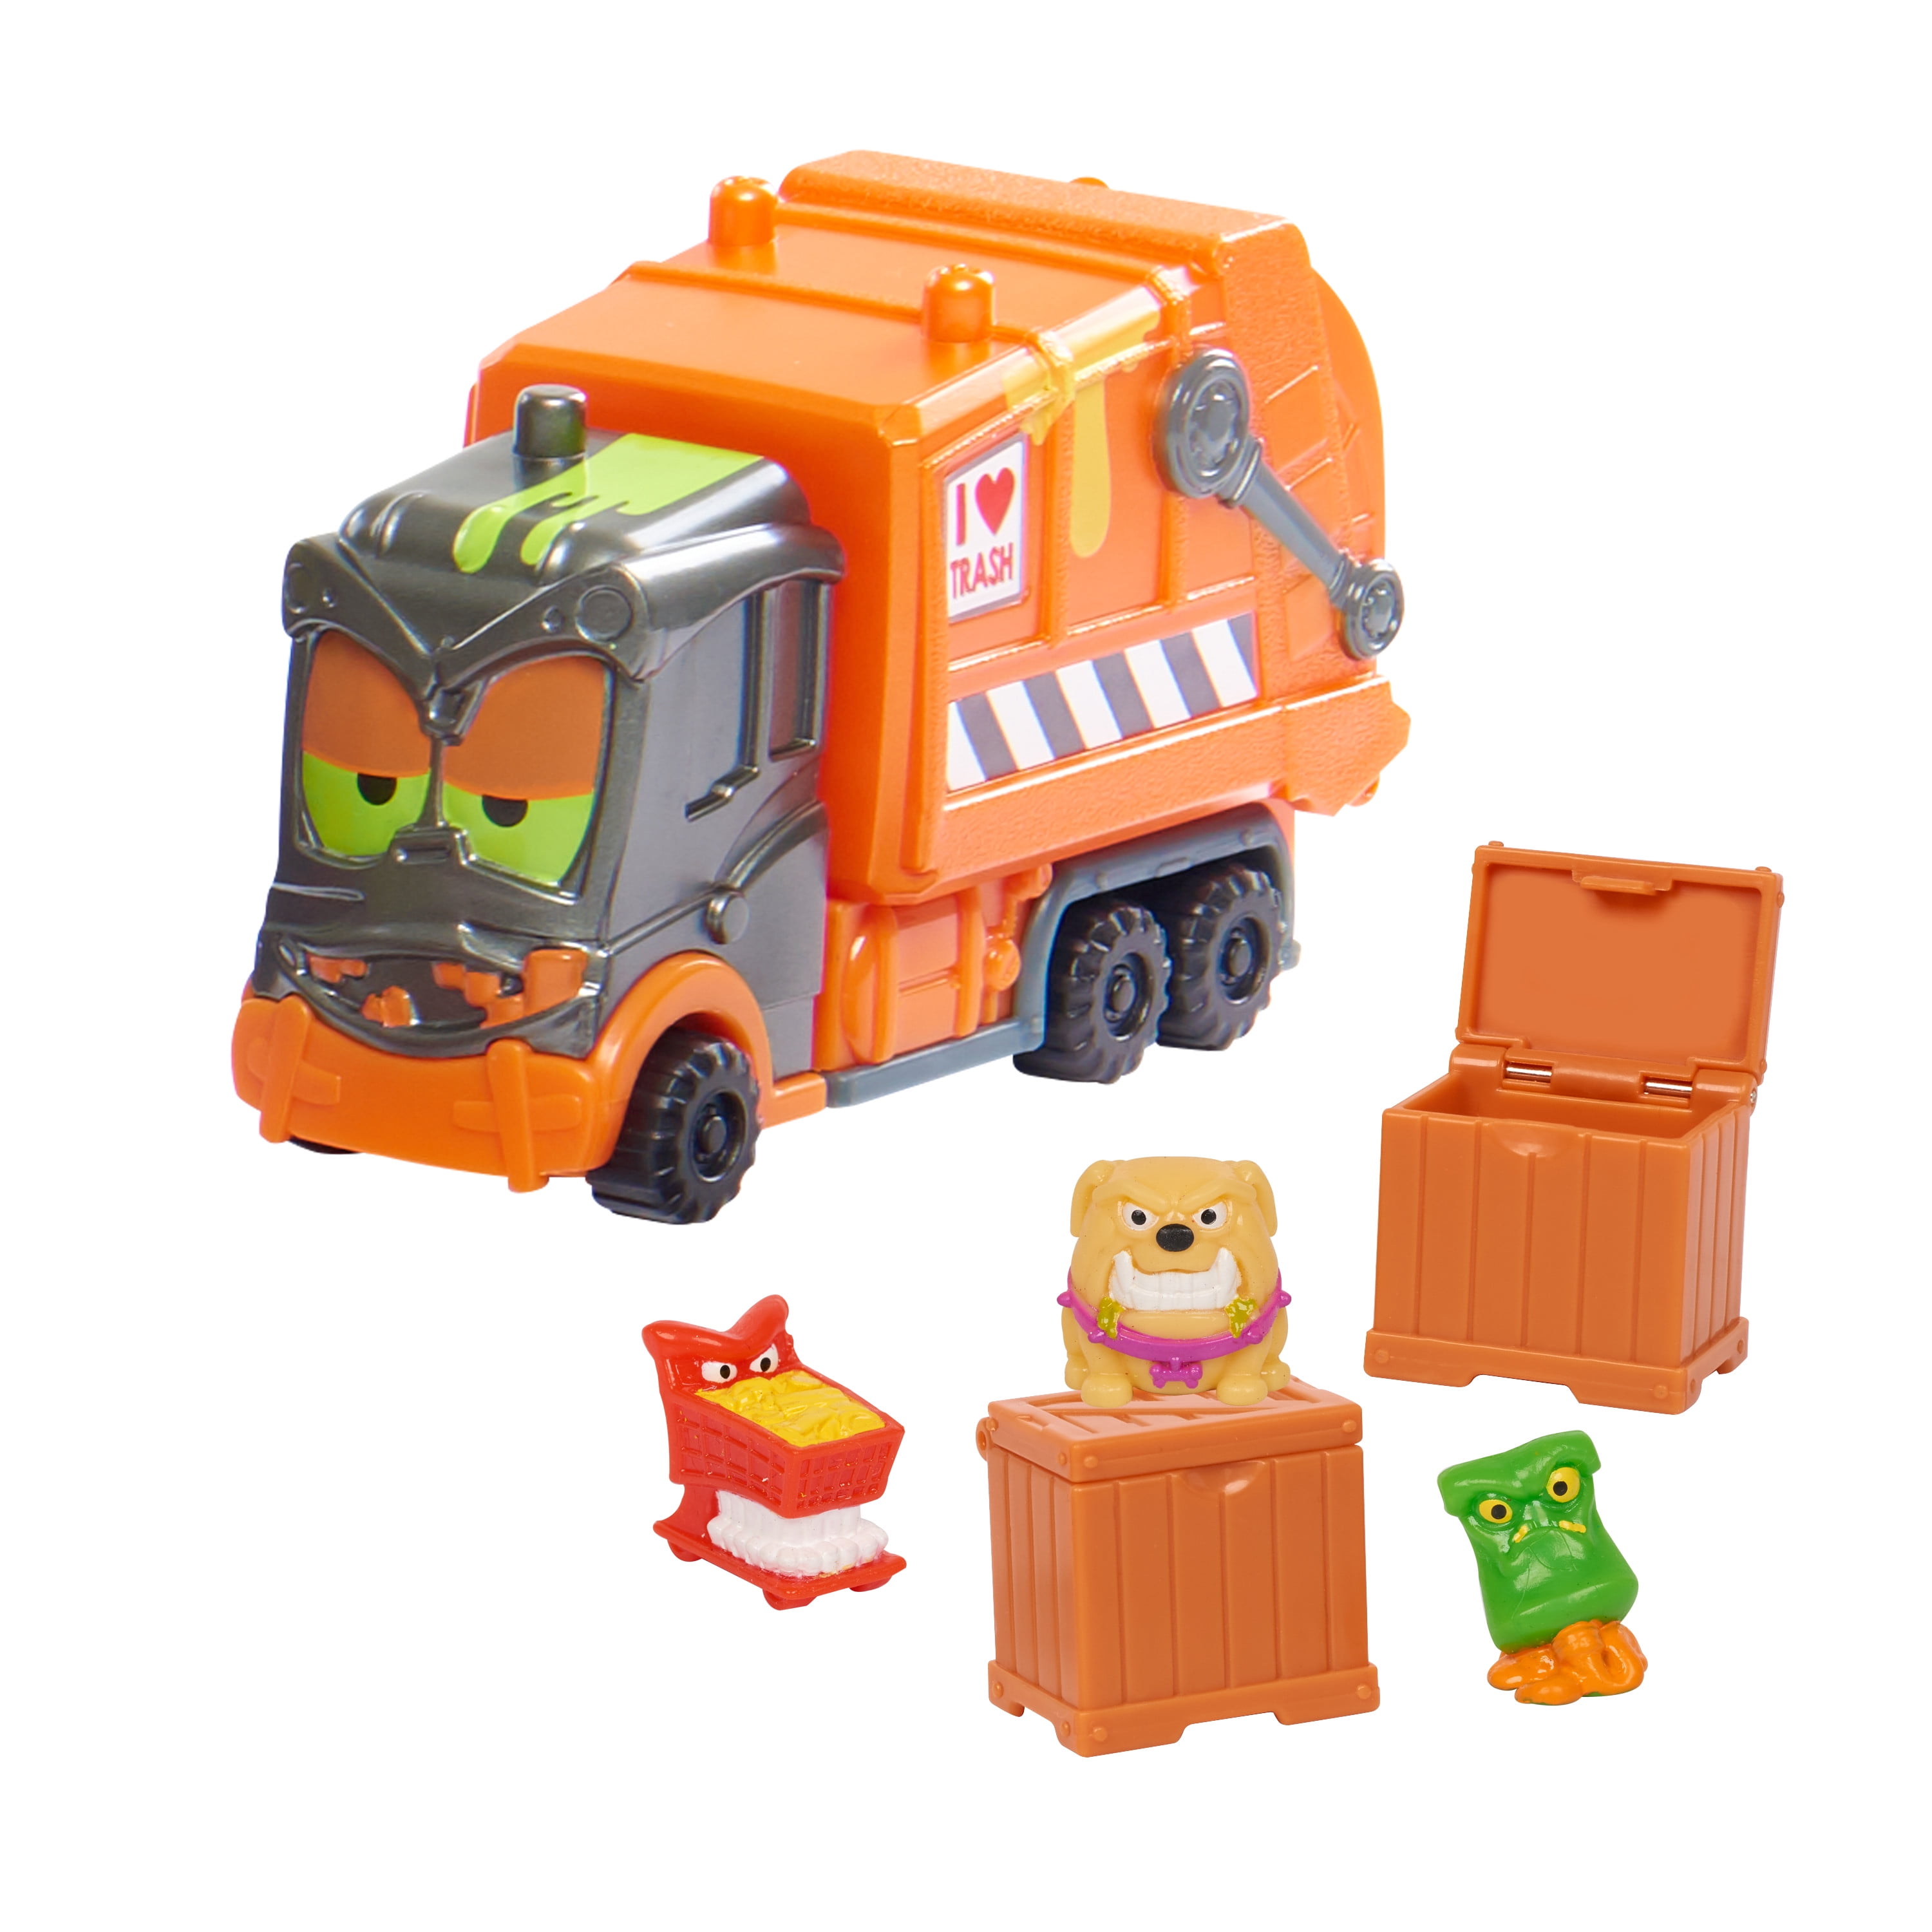 Smash Crashers Trucks and Collectibles Surprise Box Unboxing Toy Review 